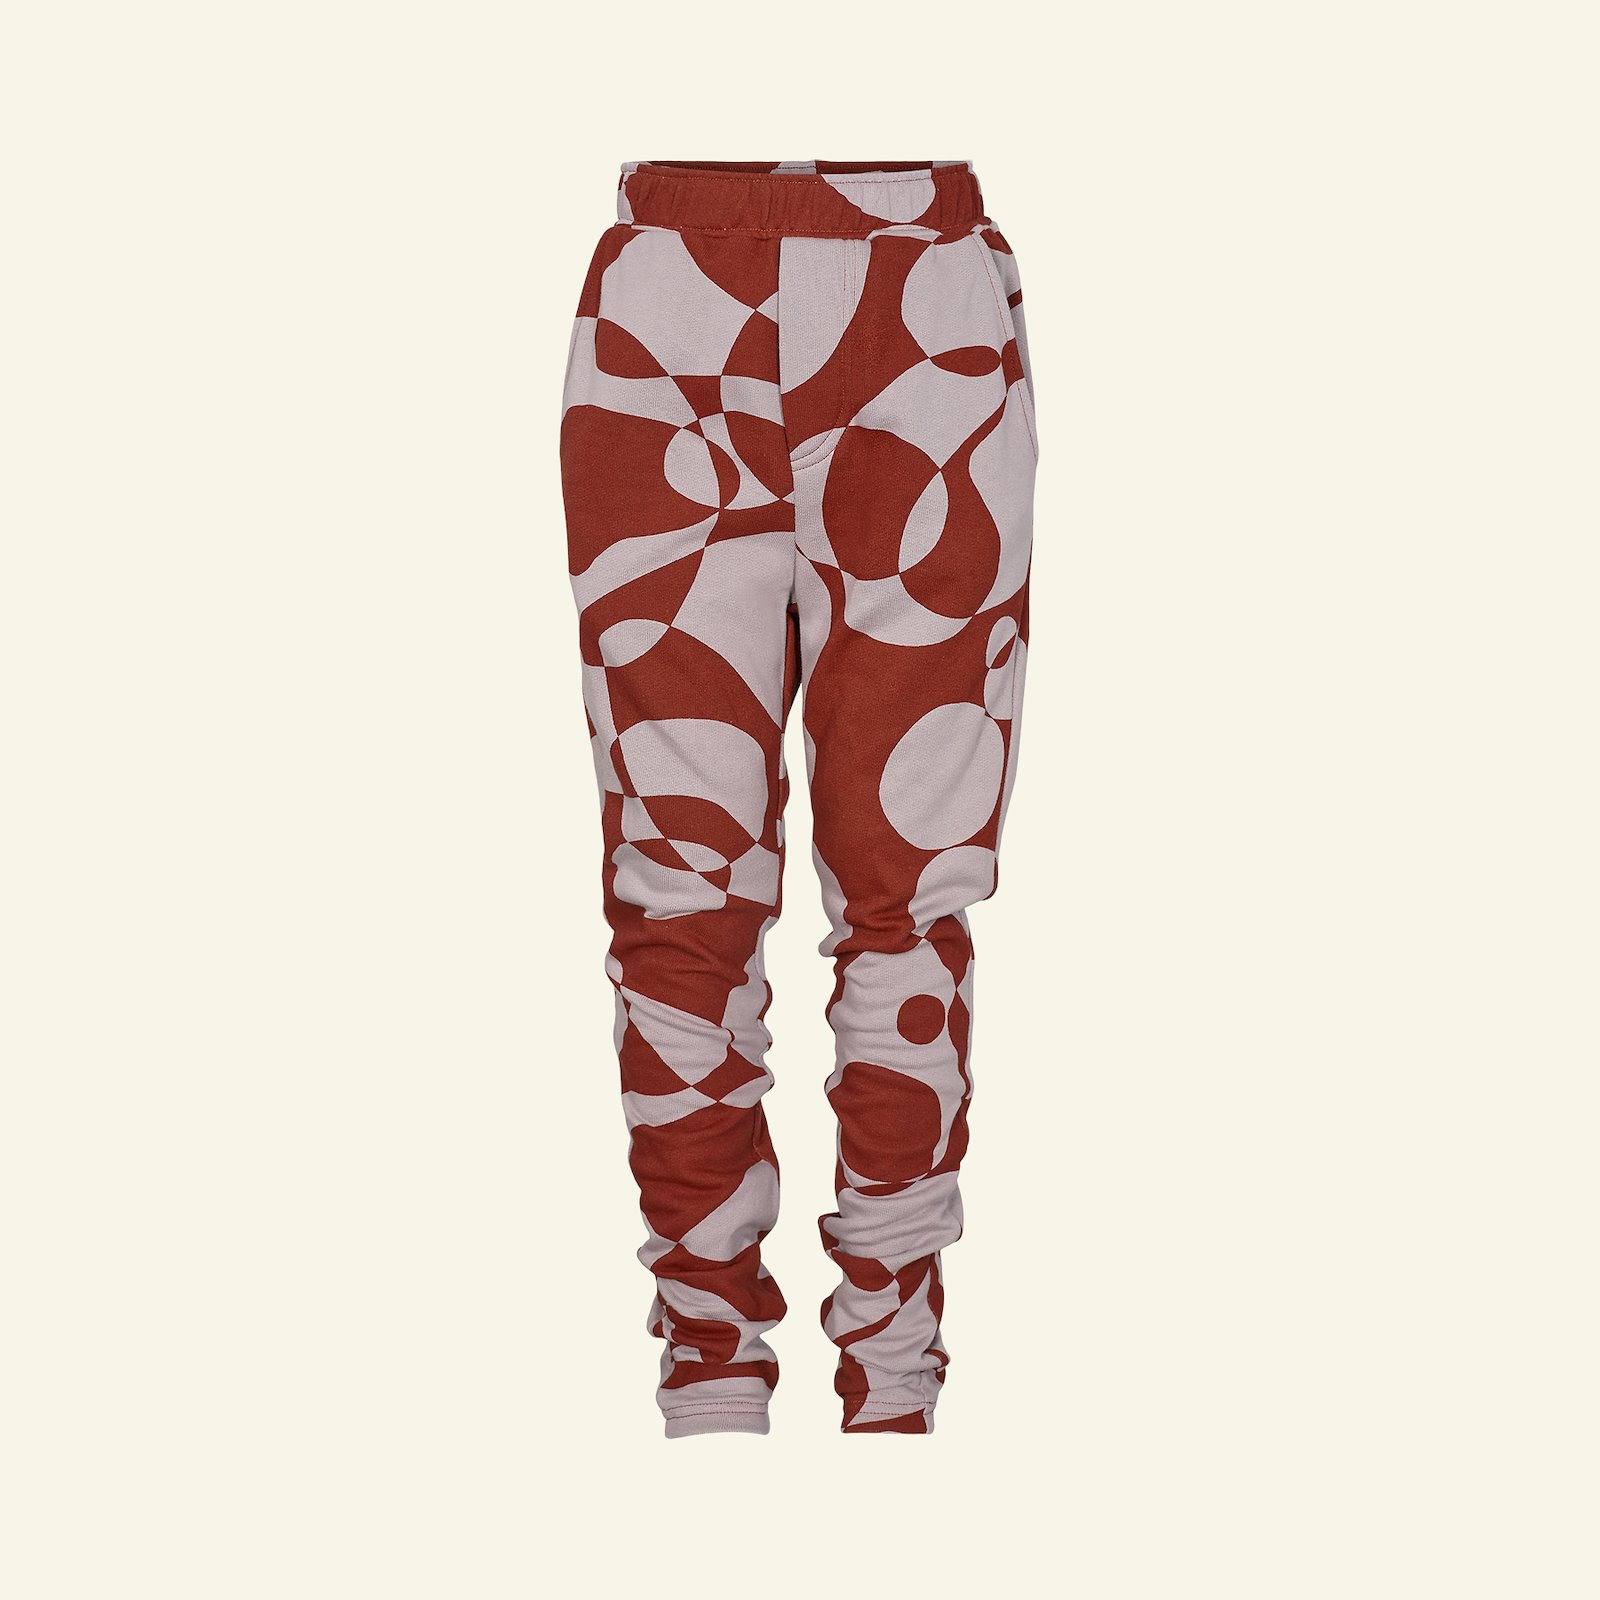 Trousers, 134/9y p60035_211818_sskit